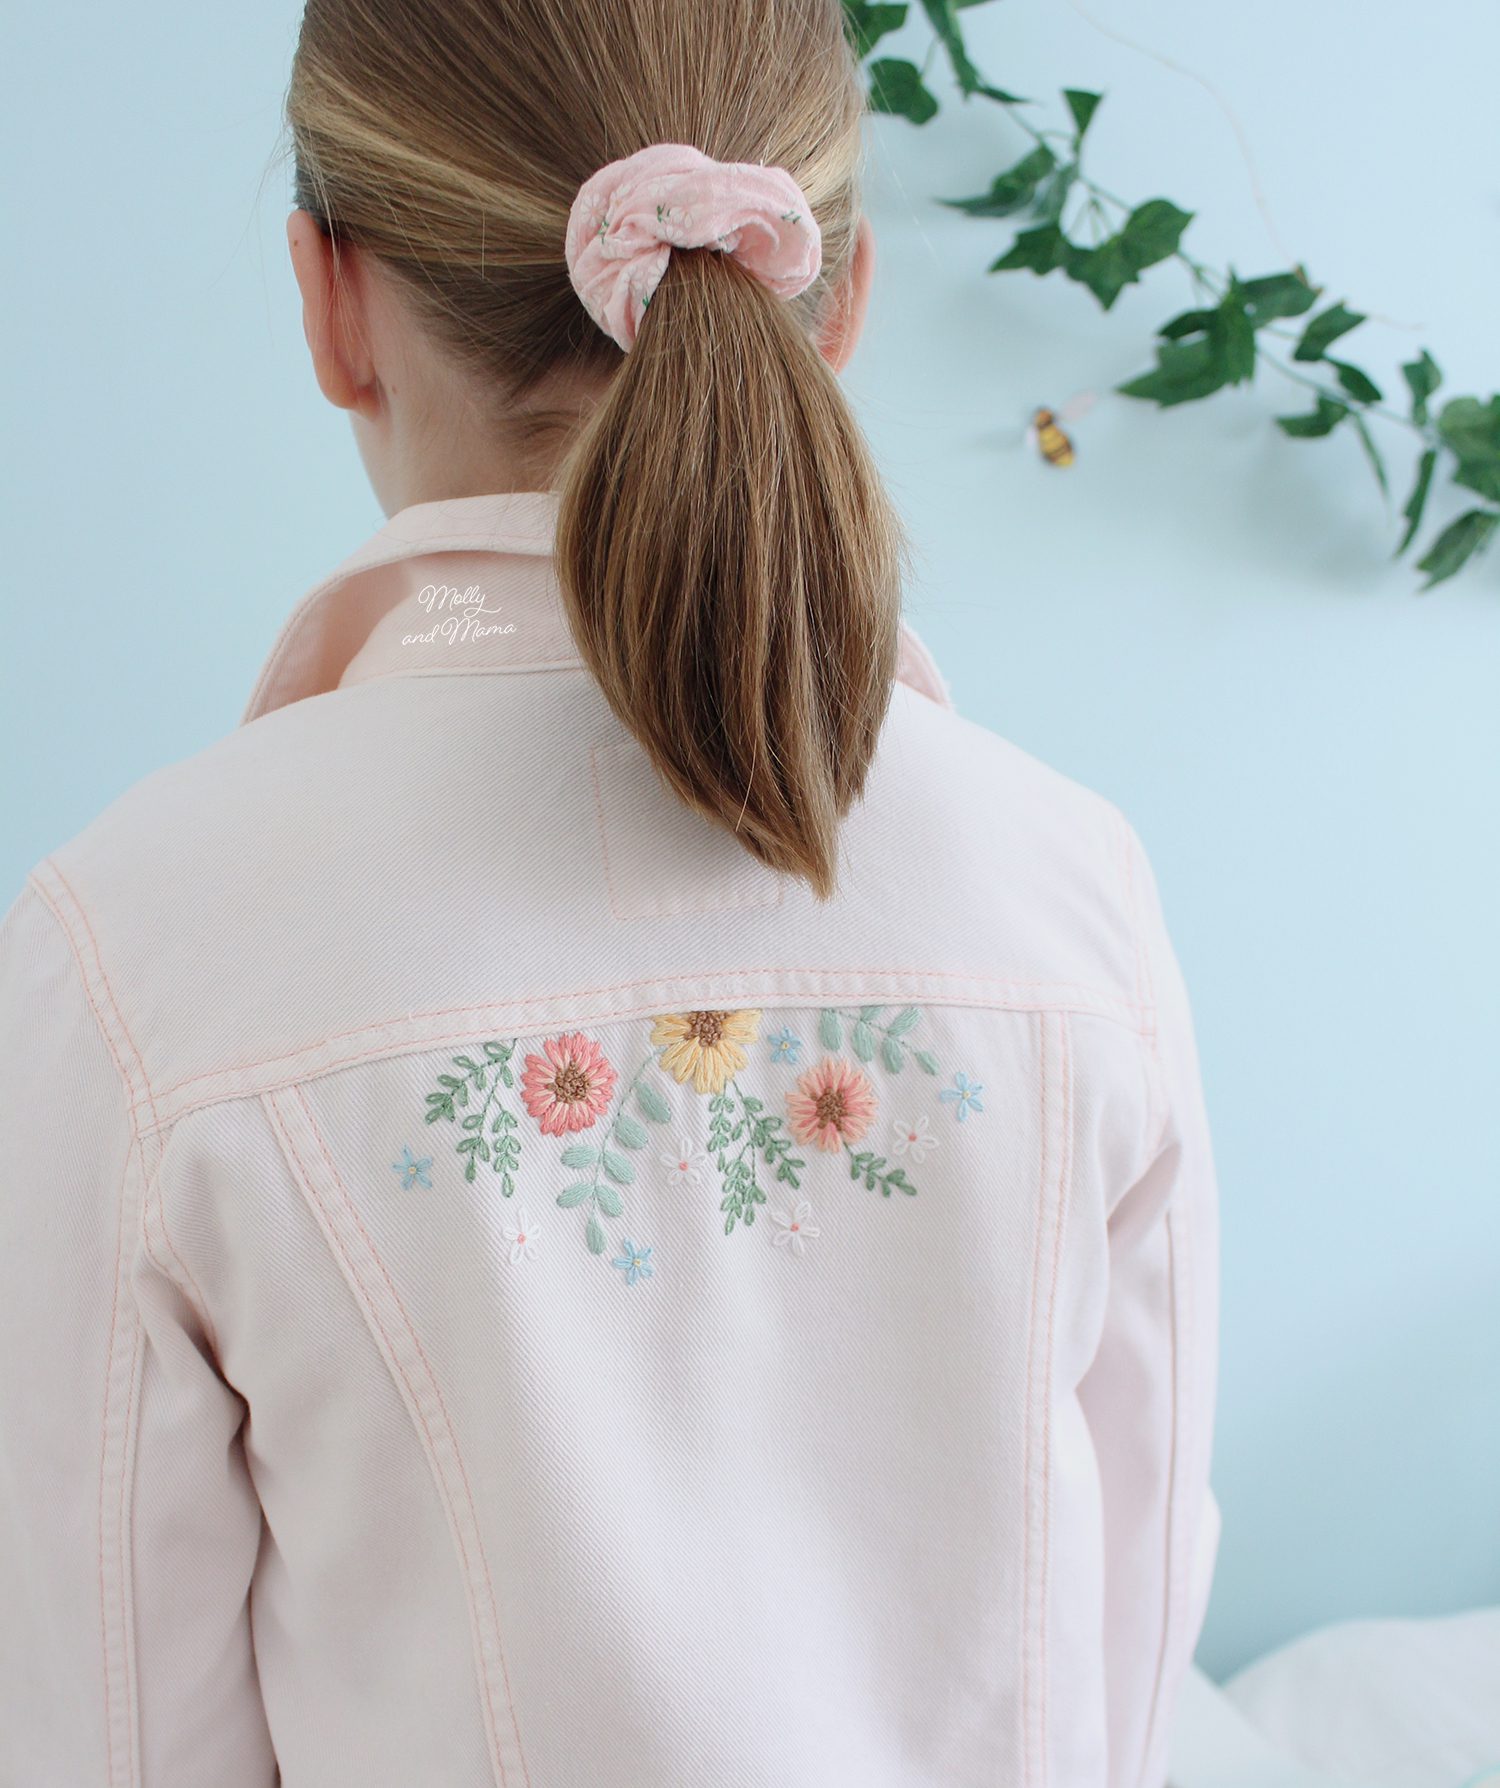 An Embroidered Denim Jacket for the Retro Stitchery Book Tour